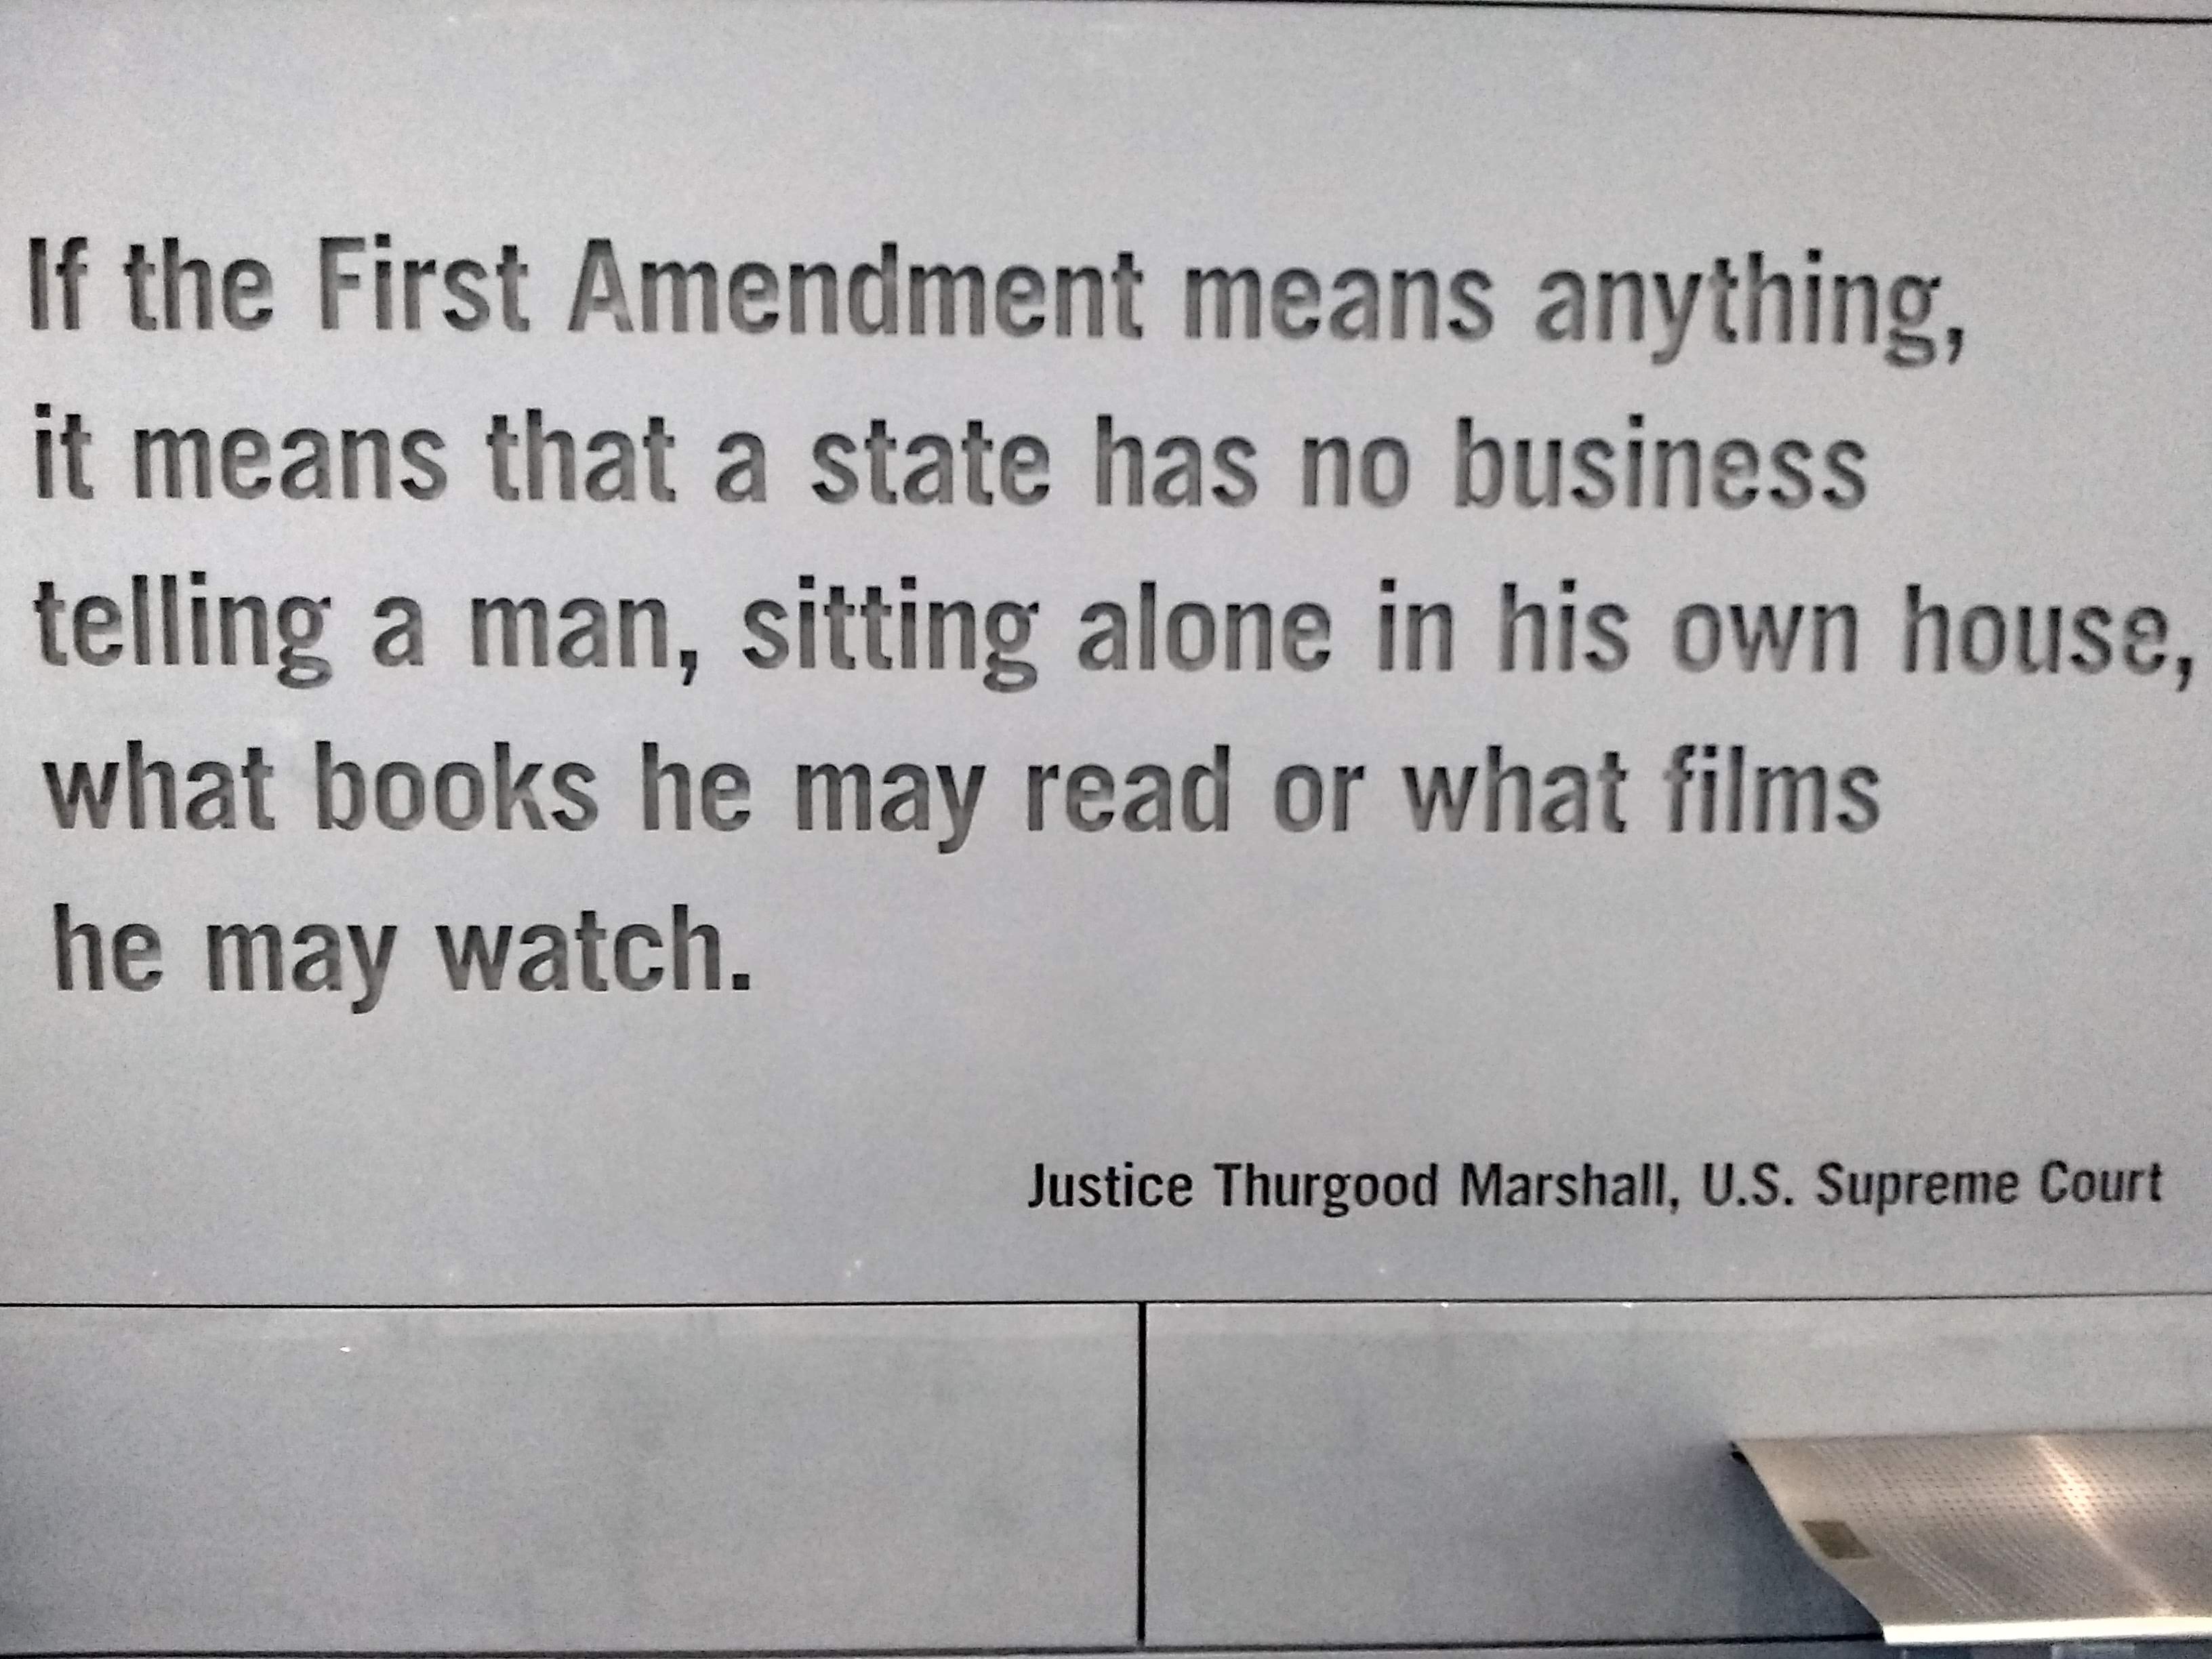 Stone wall at Newseum in D.C. with etched quote: If the First Amendment means anything, it means that a state has no business telling a man, sitting alone in his own house, what books he may read or what films he may watch.